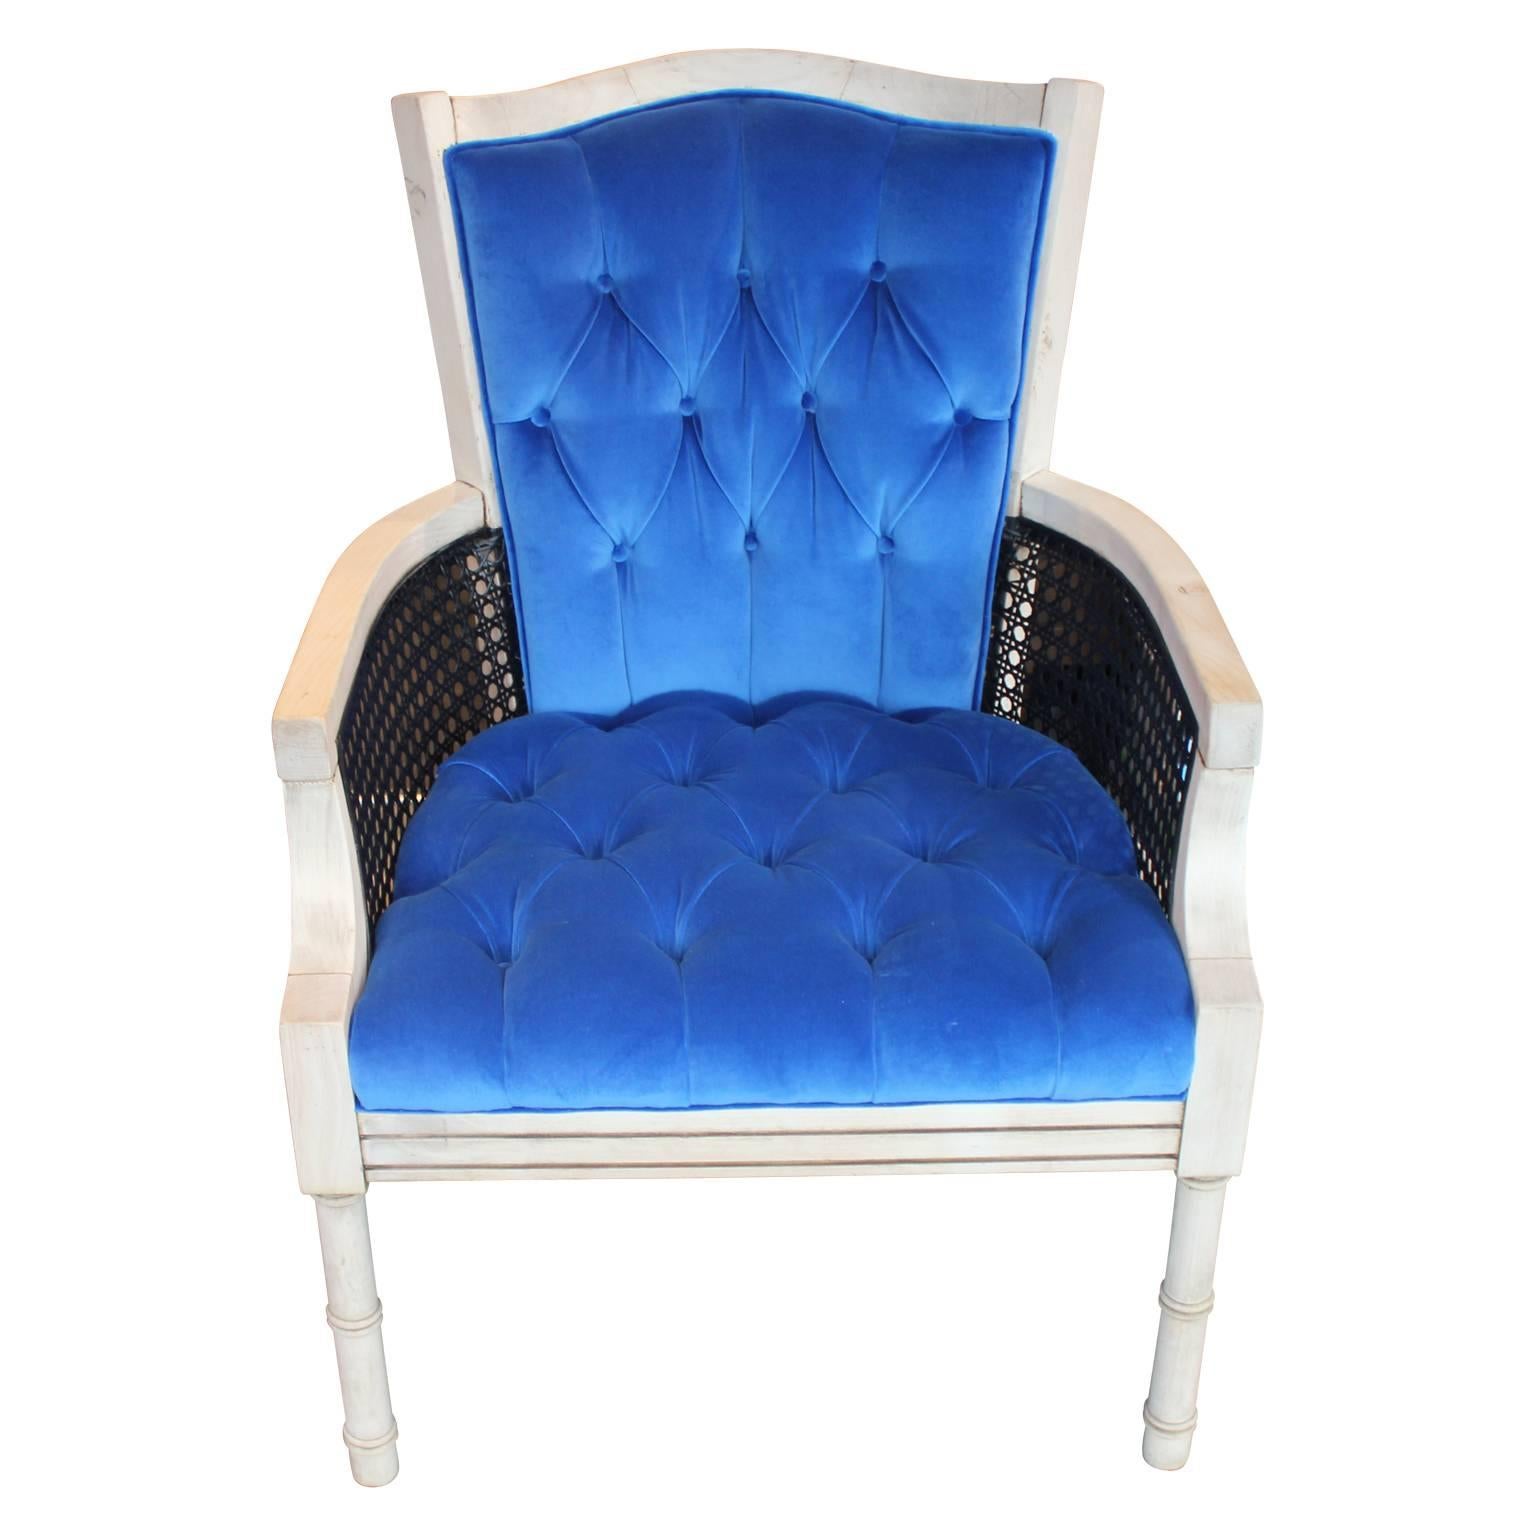 Lovely French cane lounge chair freshly upholstered and tufted in a lush blue velvet. The combination of the dark cane sides with the bleached wood frames offers a lovely contrast. The cane is in wonderful condition. 